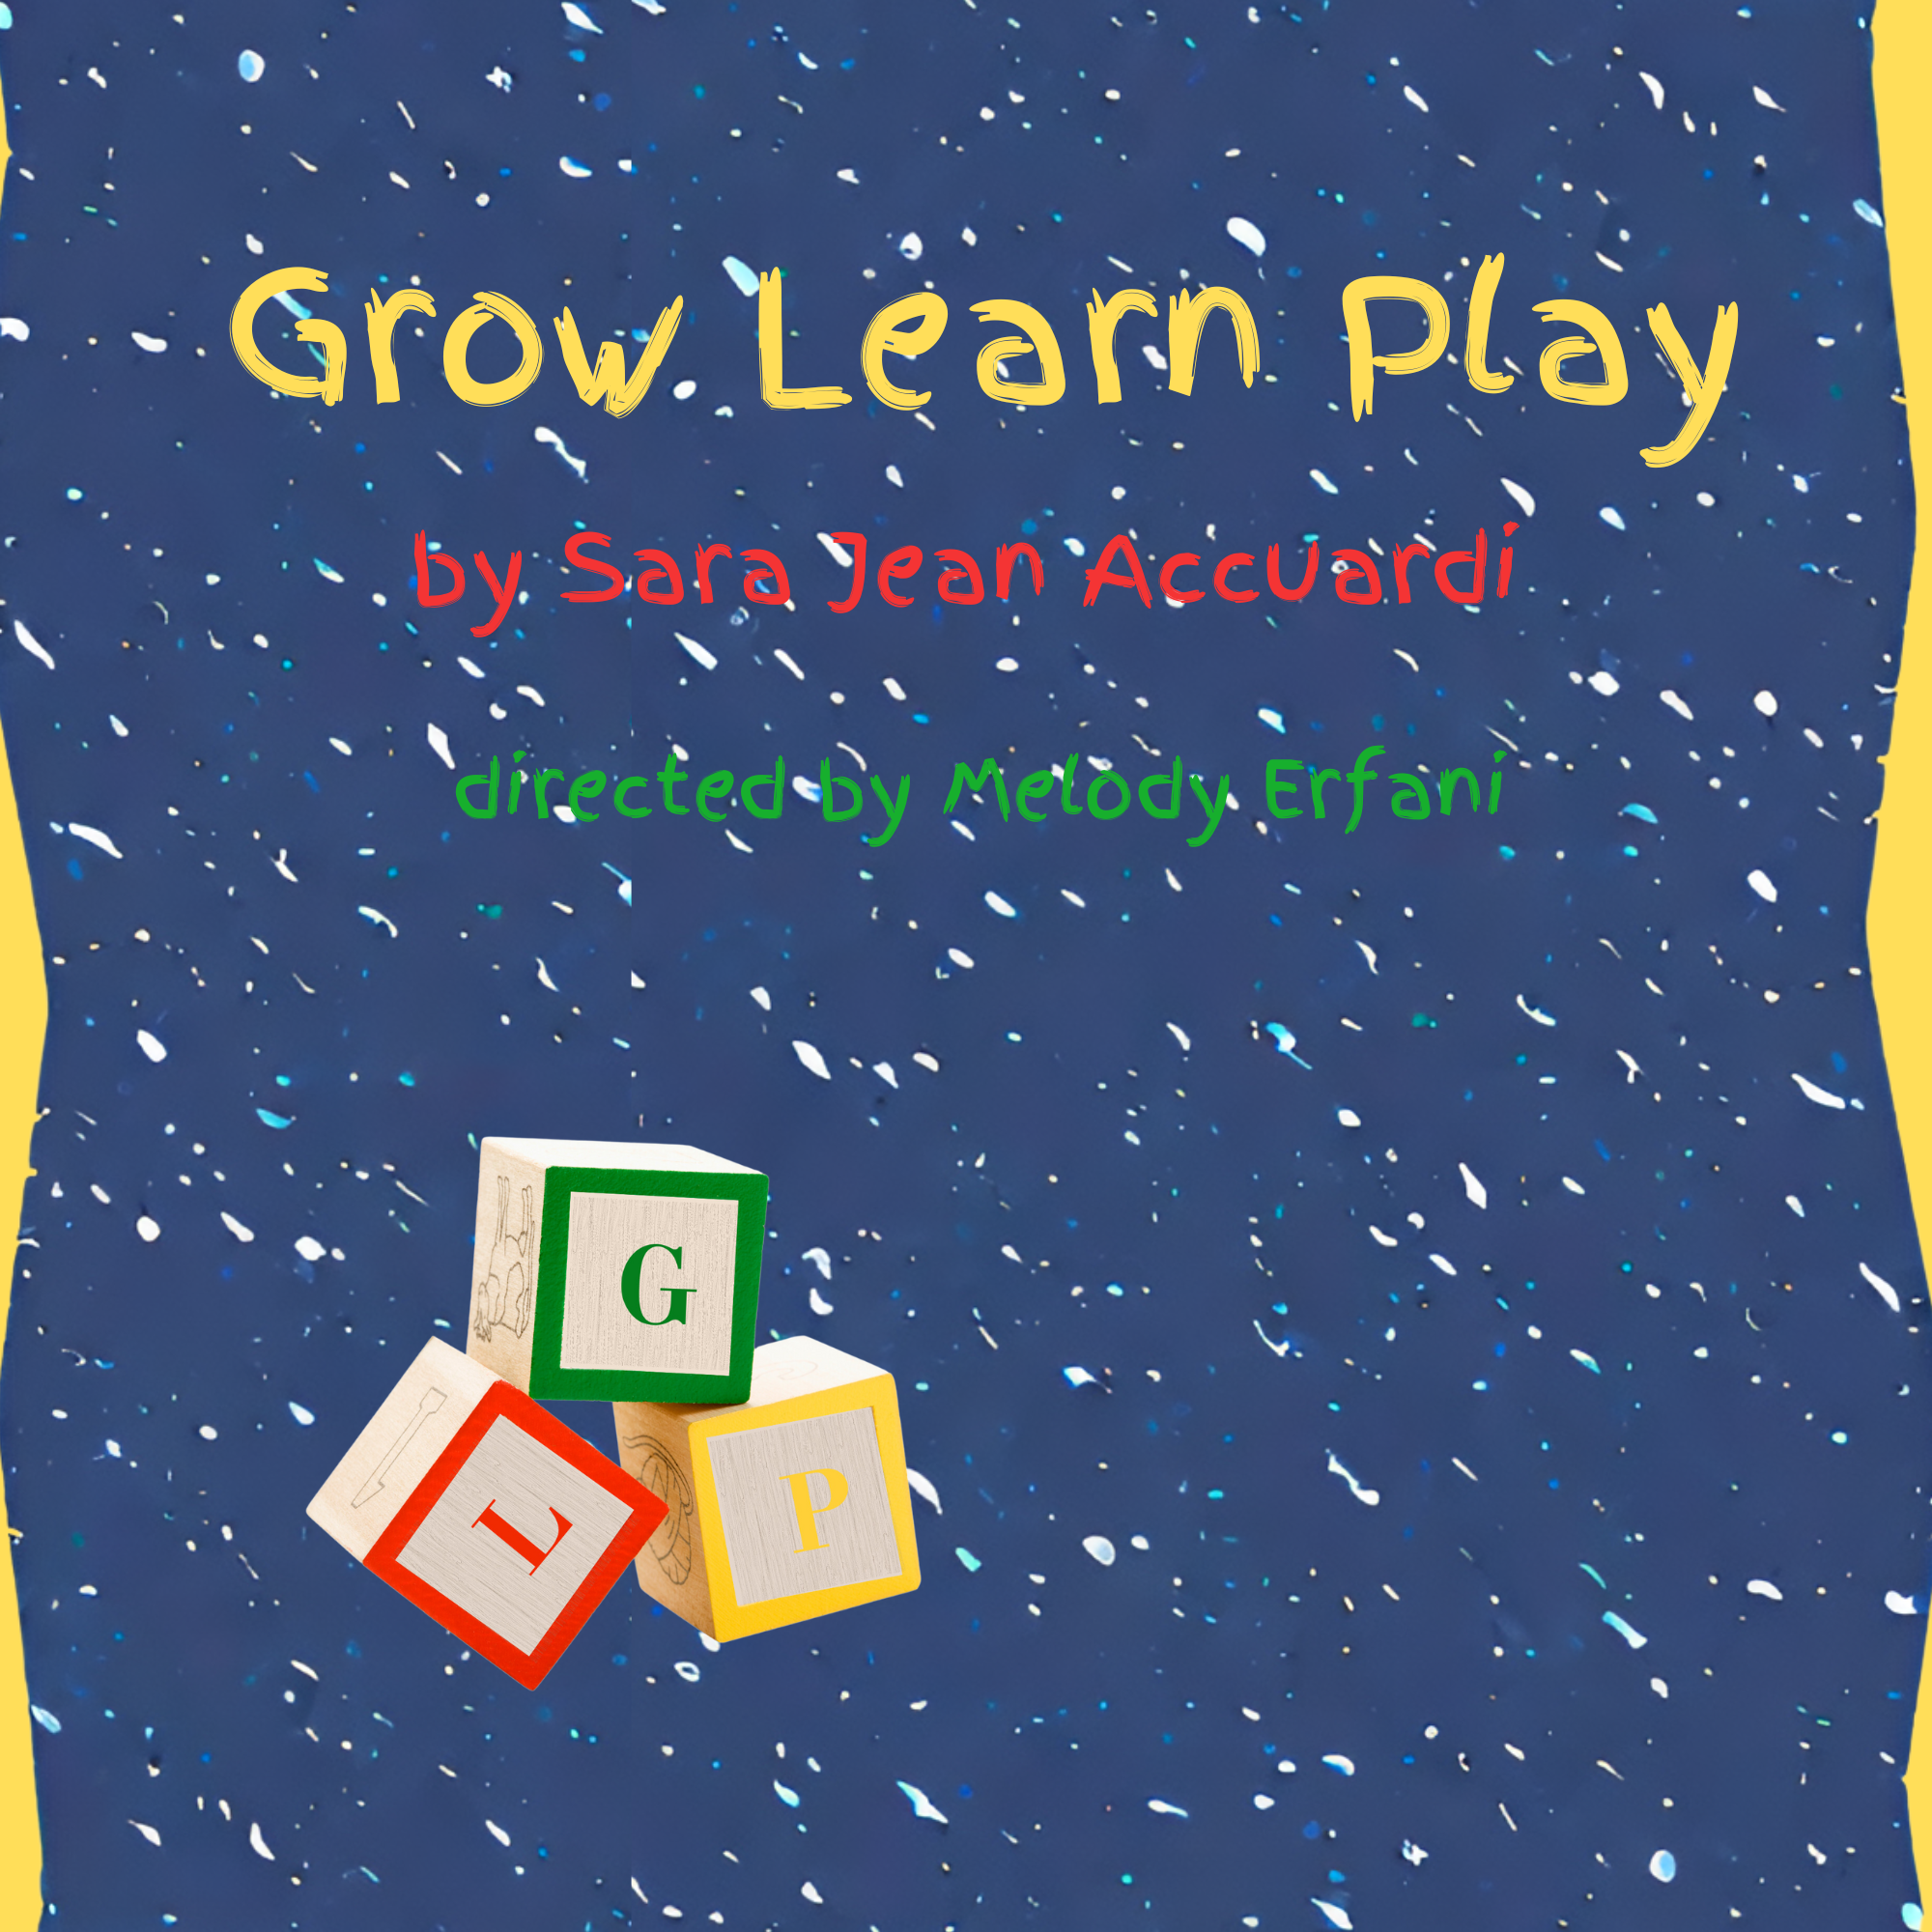 Poster of Grow Learn Play by Sara Jean Accuardi